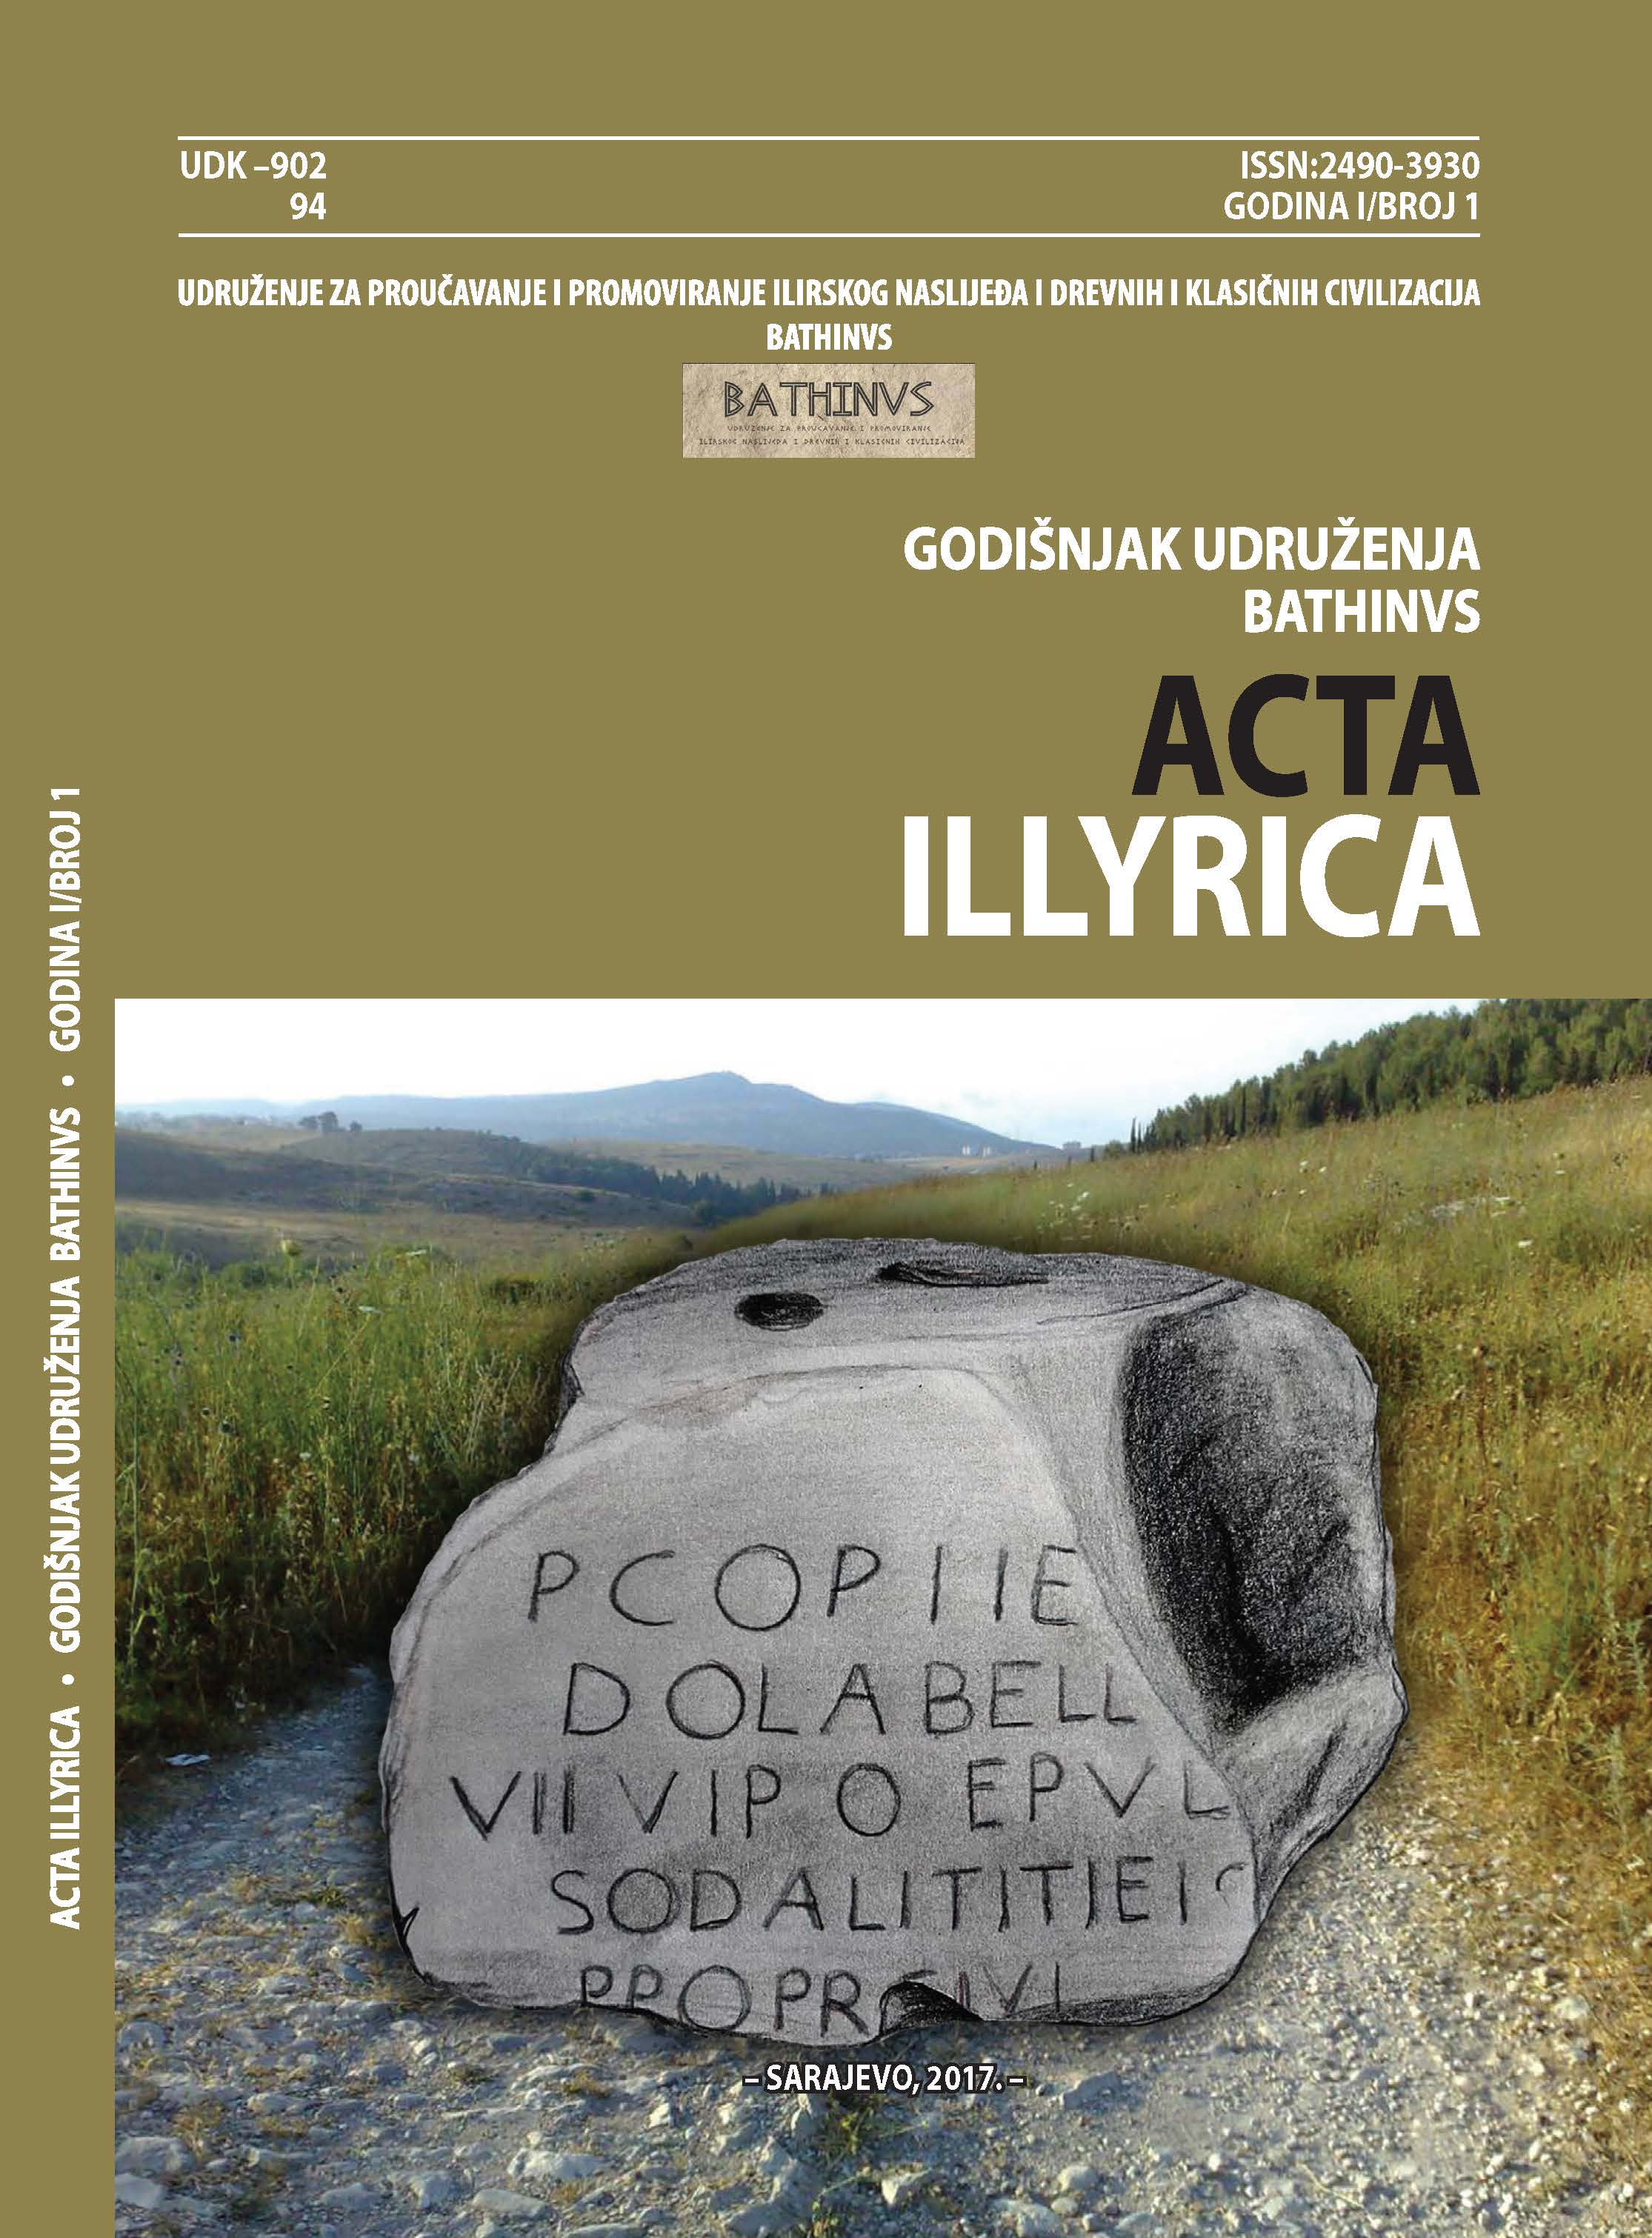 The process of Romanisation in the inland of the Roman province of Dalmatia in the 1st century Cover Image